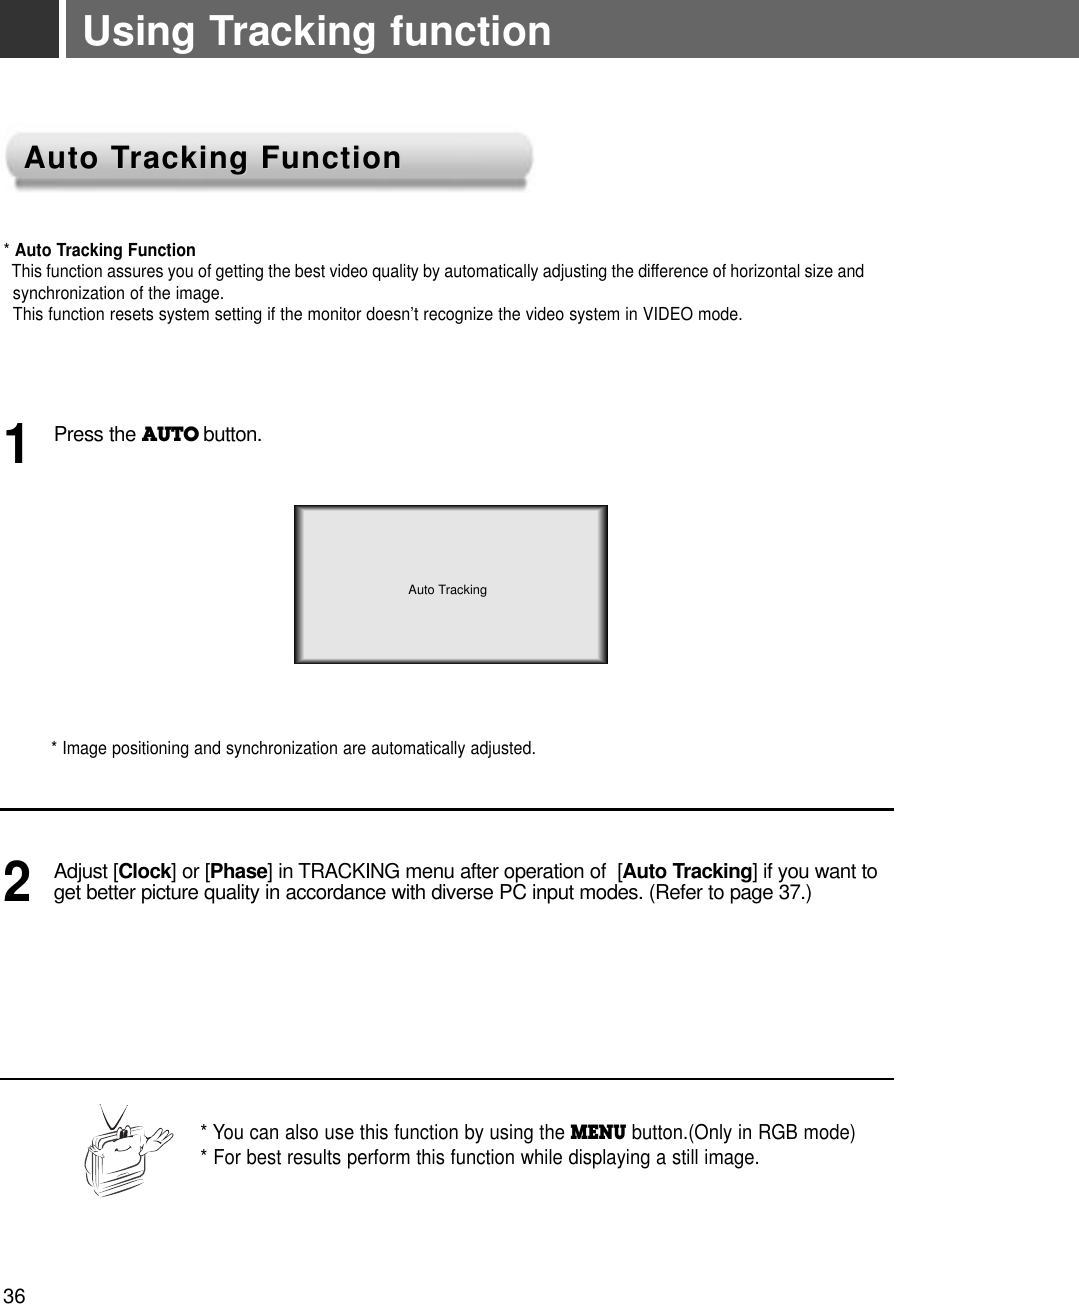 Using Tracking function* Auto Tracking FunctionThis function assures you of getting the best video quality by automatically adjusting the difference of horizontal size andsynchronization of the image. This function resets system setting if the monitor doesn’t recognize the video system in VIDEO mode.* Image positioning and synchronization are automatically adjusted.Press the AUTO button.1Adjust [Clock] or [Phase] in TRACKING menu after operation of  [Auto Tracking] if you want toget better picture quality in accordance with diverse PC input modes. (Refer to page 37.)2* You can also use this function by using the MENU button.(Only in RGB mode)* For best results perform this function while displaying a still image.Auto TrackingAuto TAuto Tracking Functionracking Function36